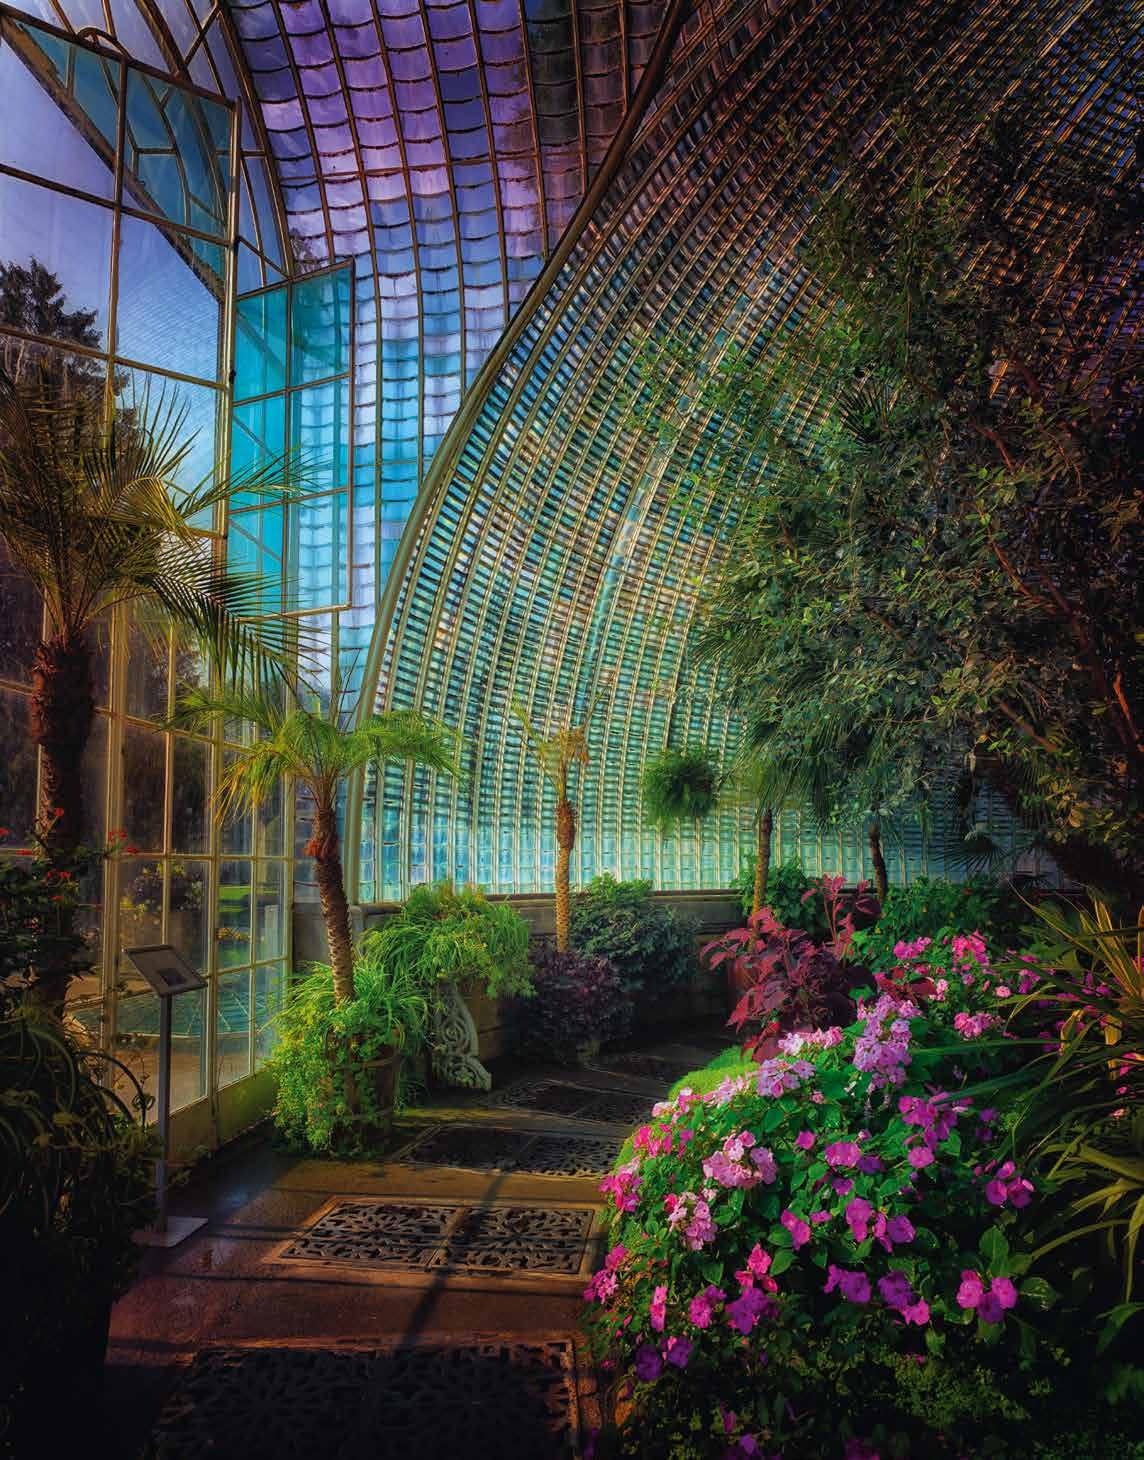 Greenhouses - Cathedrals For Plants